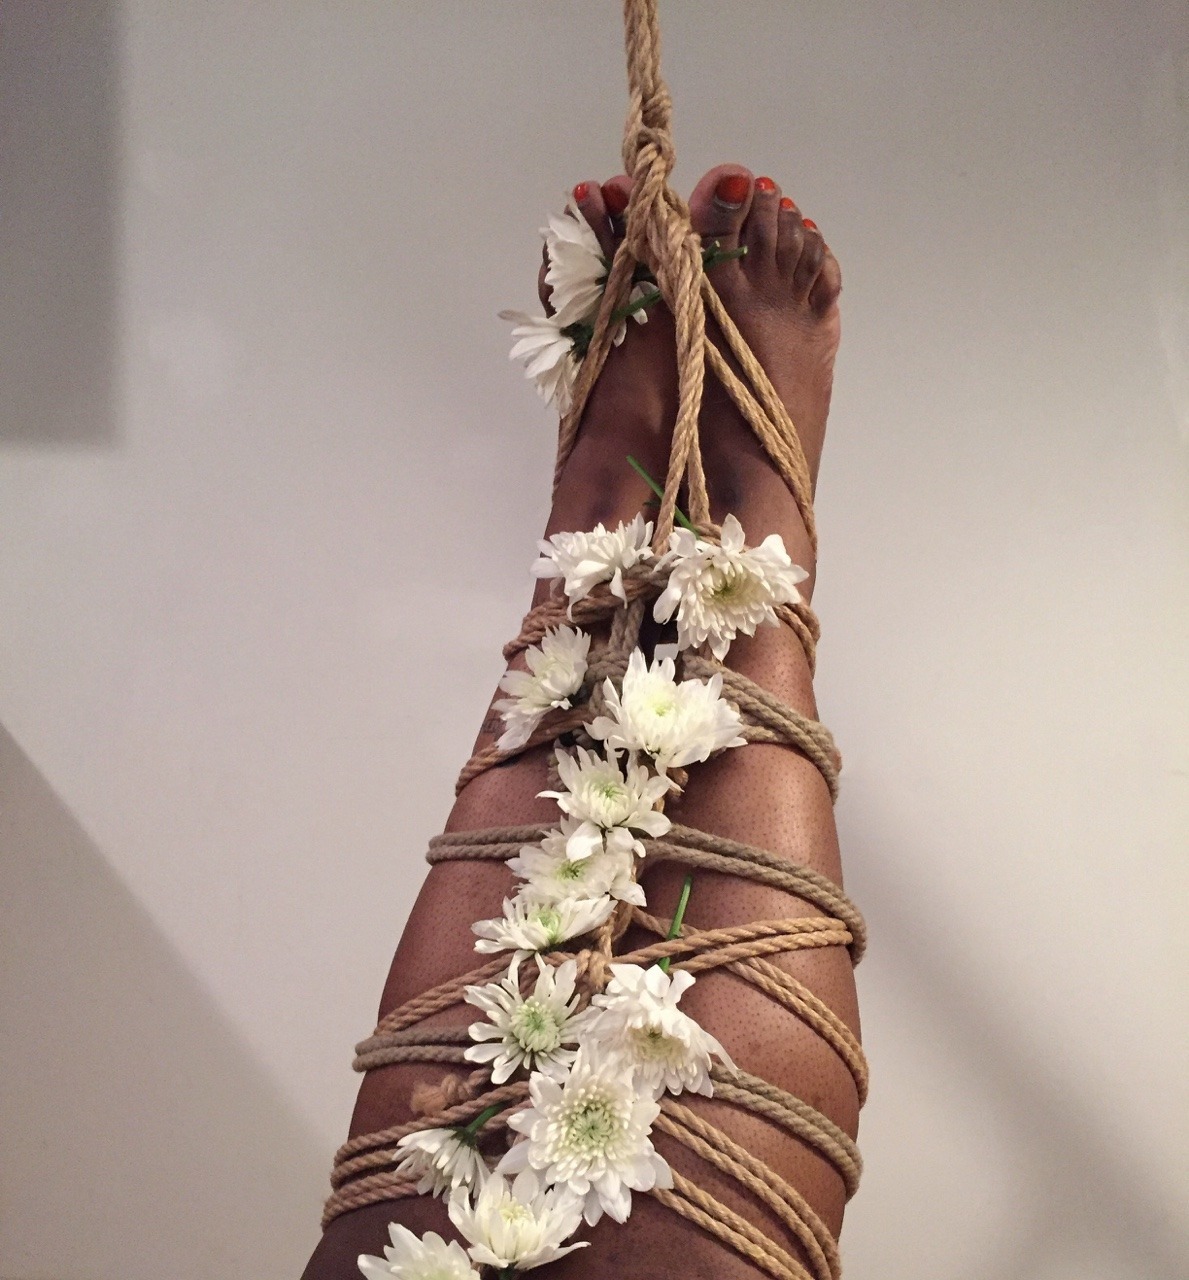 neguinhxx:Black people also practice Shibari. // My Collection for Black is Beautiful.